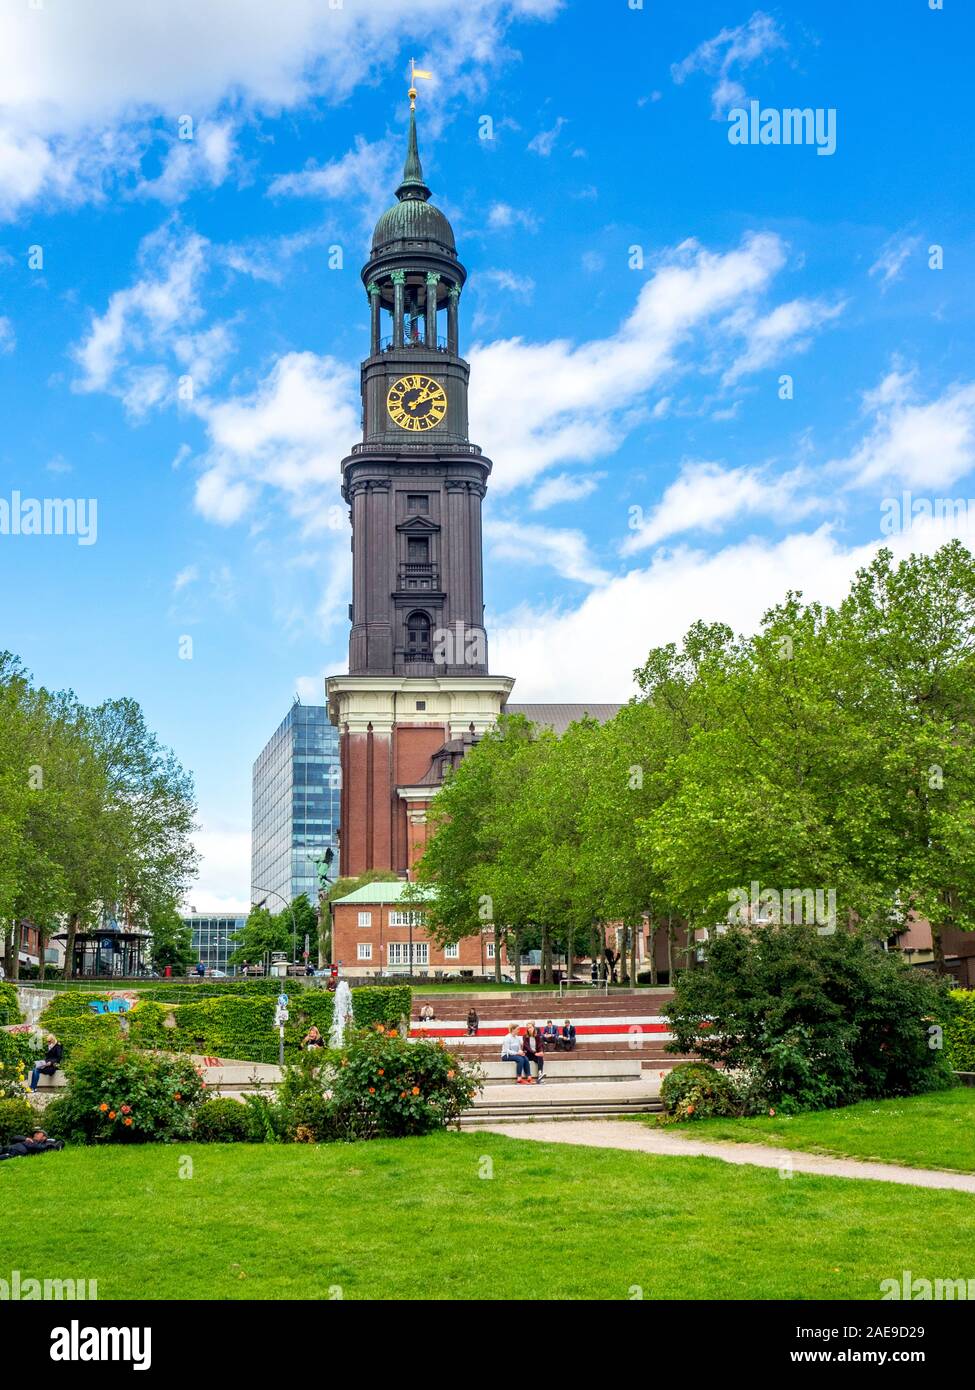 St. Michael's Lutheran Church and it's copper belfry and clock tower in Neustadt Hamburg Germany. Stock Photo